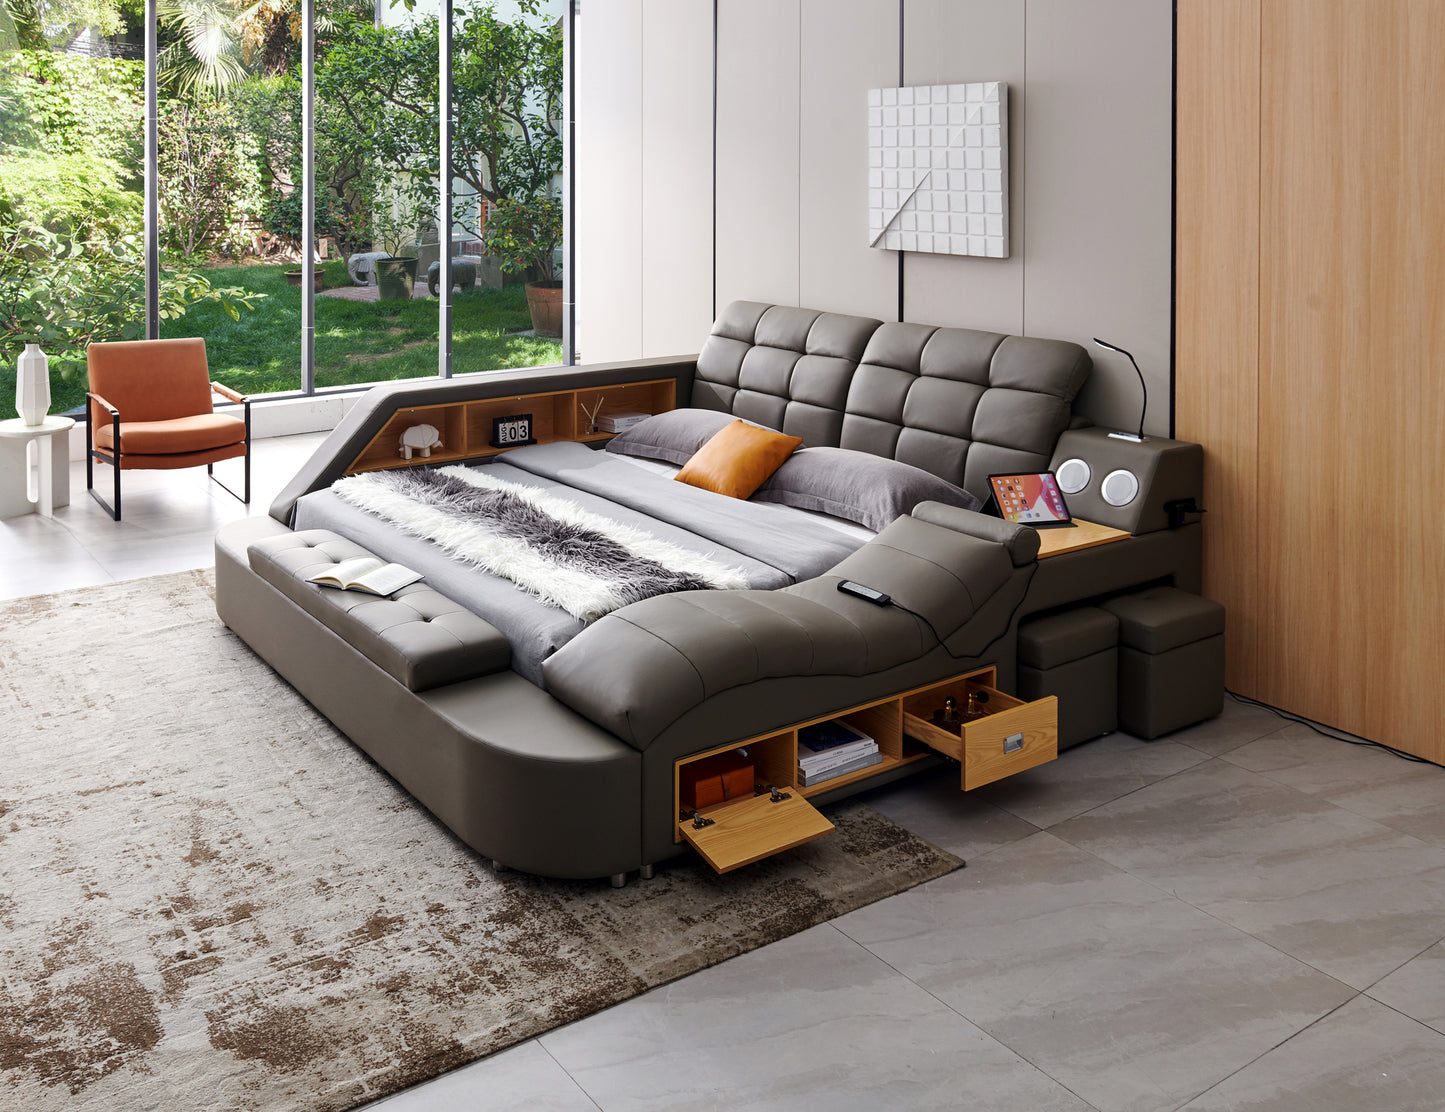 Multifunctional Upholstered Storage Bed Frame, Massage Chaise Lounge on Right, Queen Size, Grey - Enova Luxe Home Store